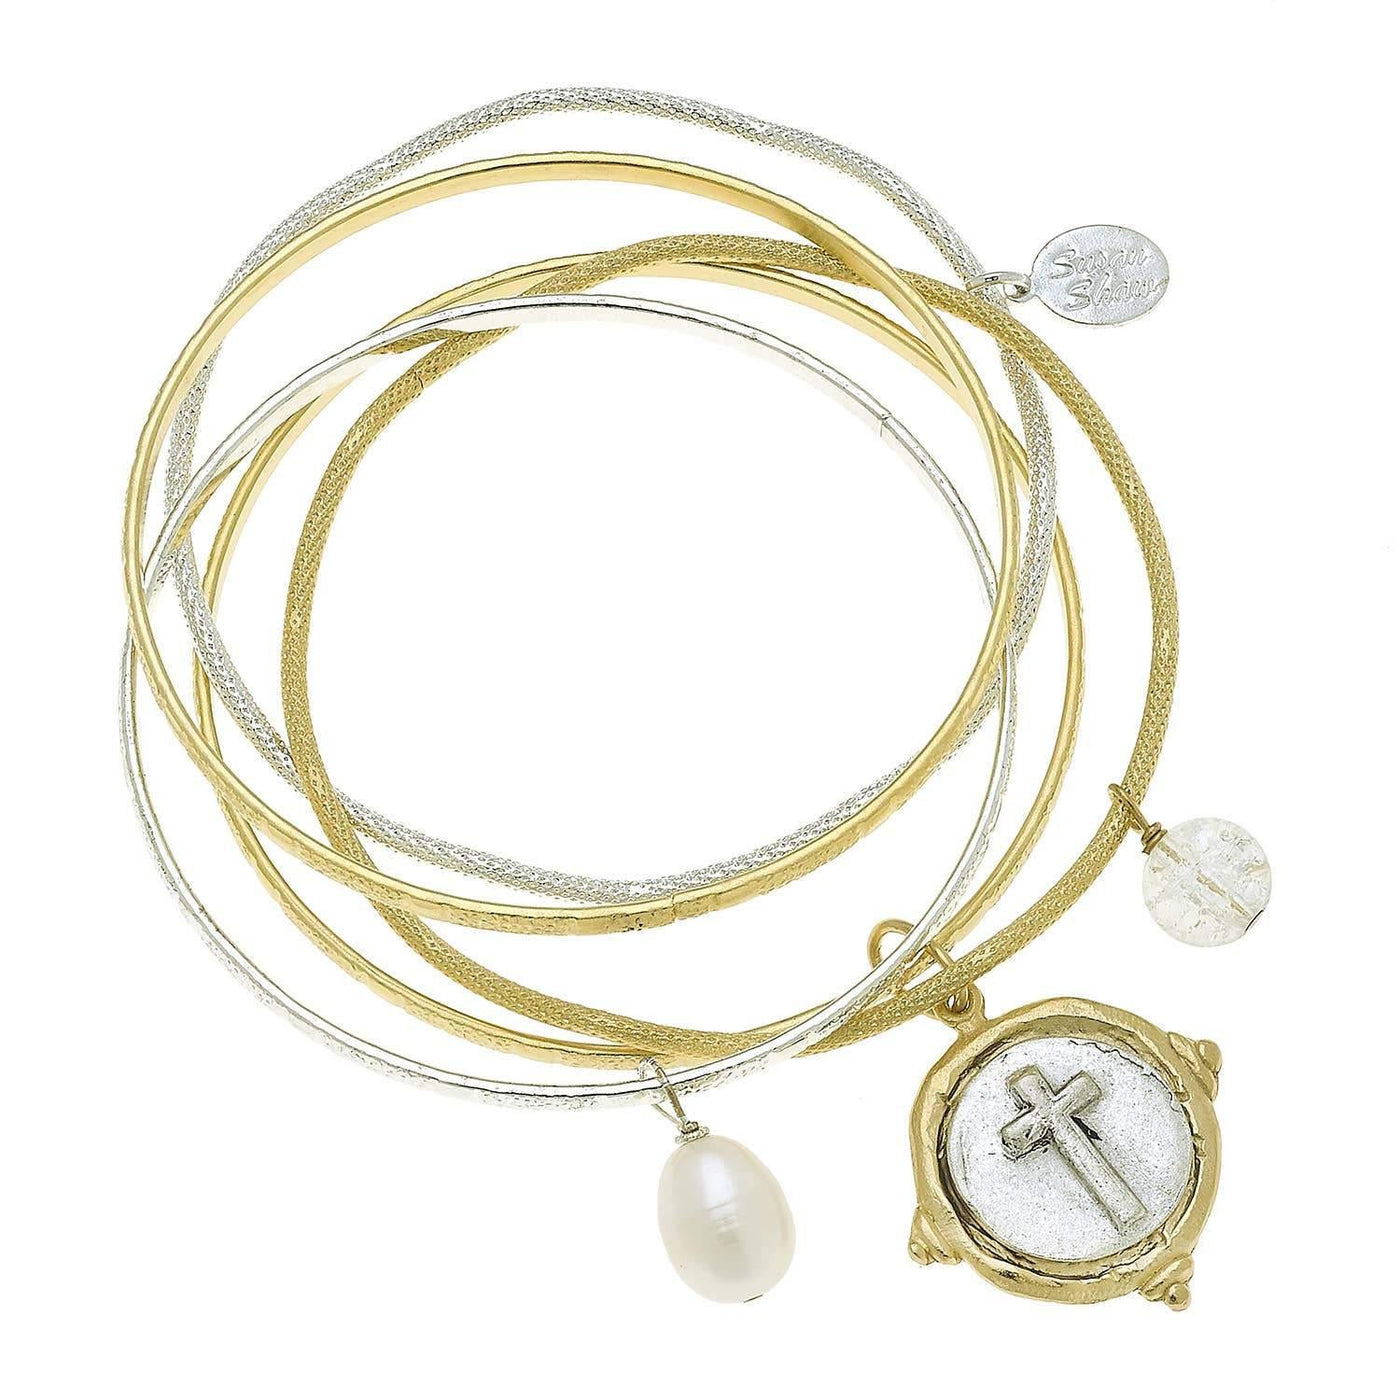 Gold and Silver Italian Intaglio Cross with Cotton Pearl Bangle Bracelet | Fruit of the Vine Boutique 